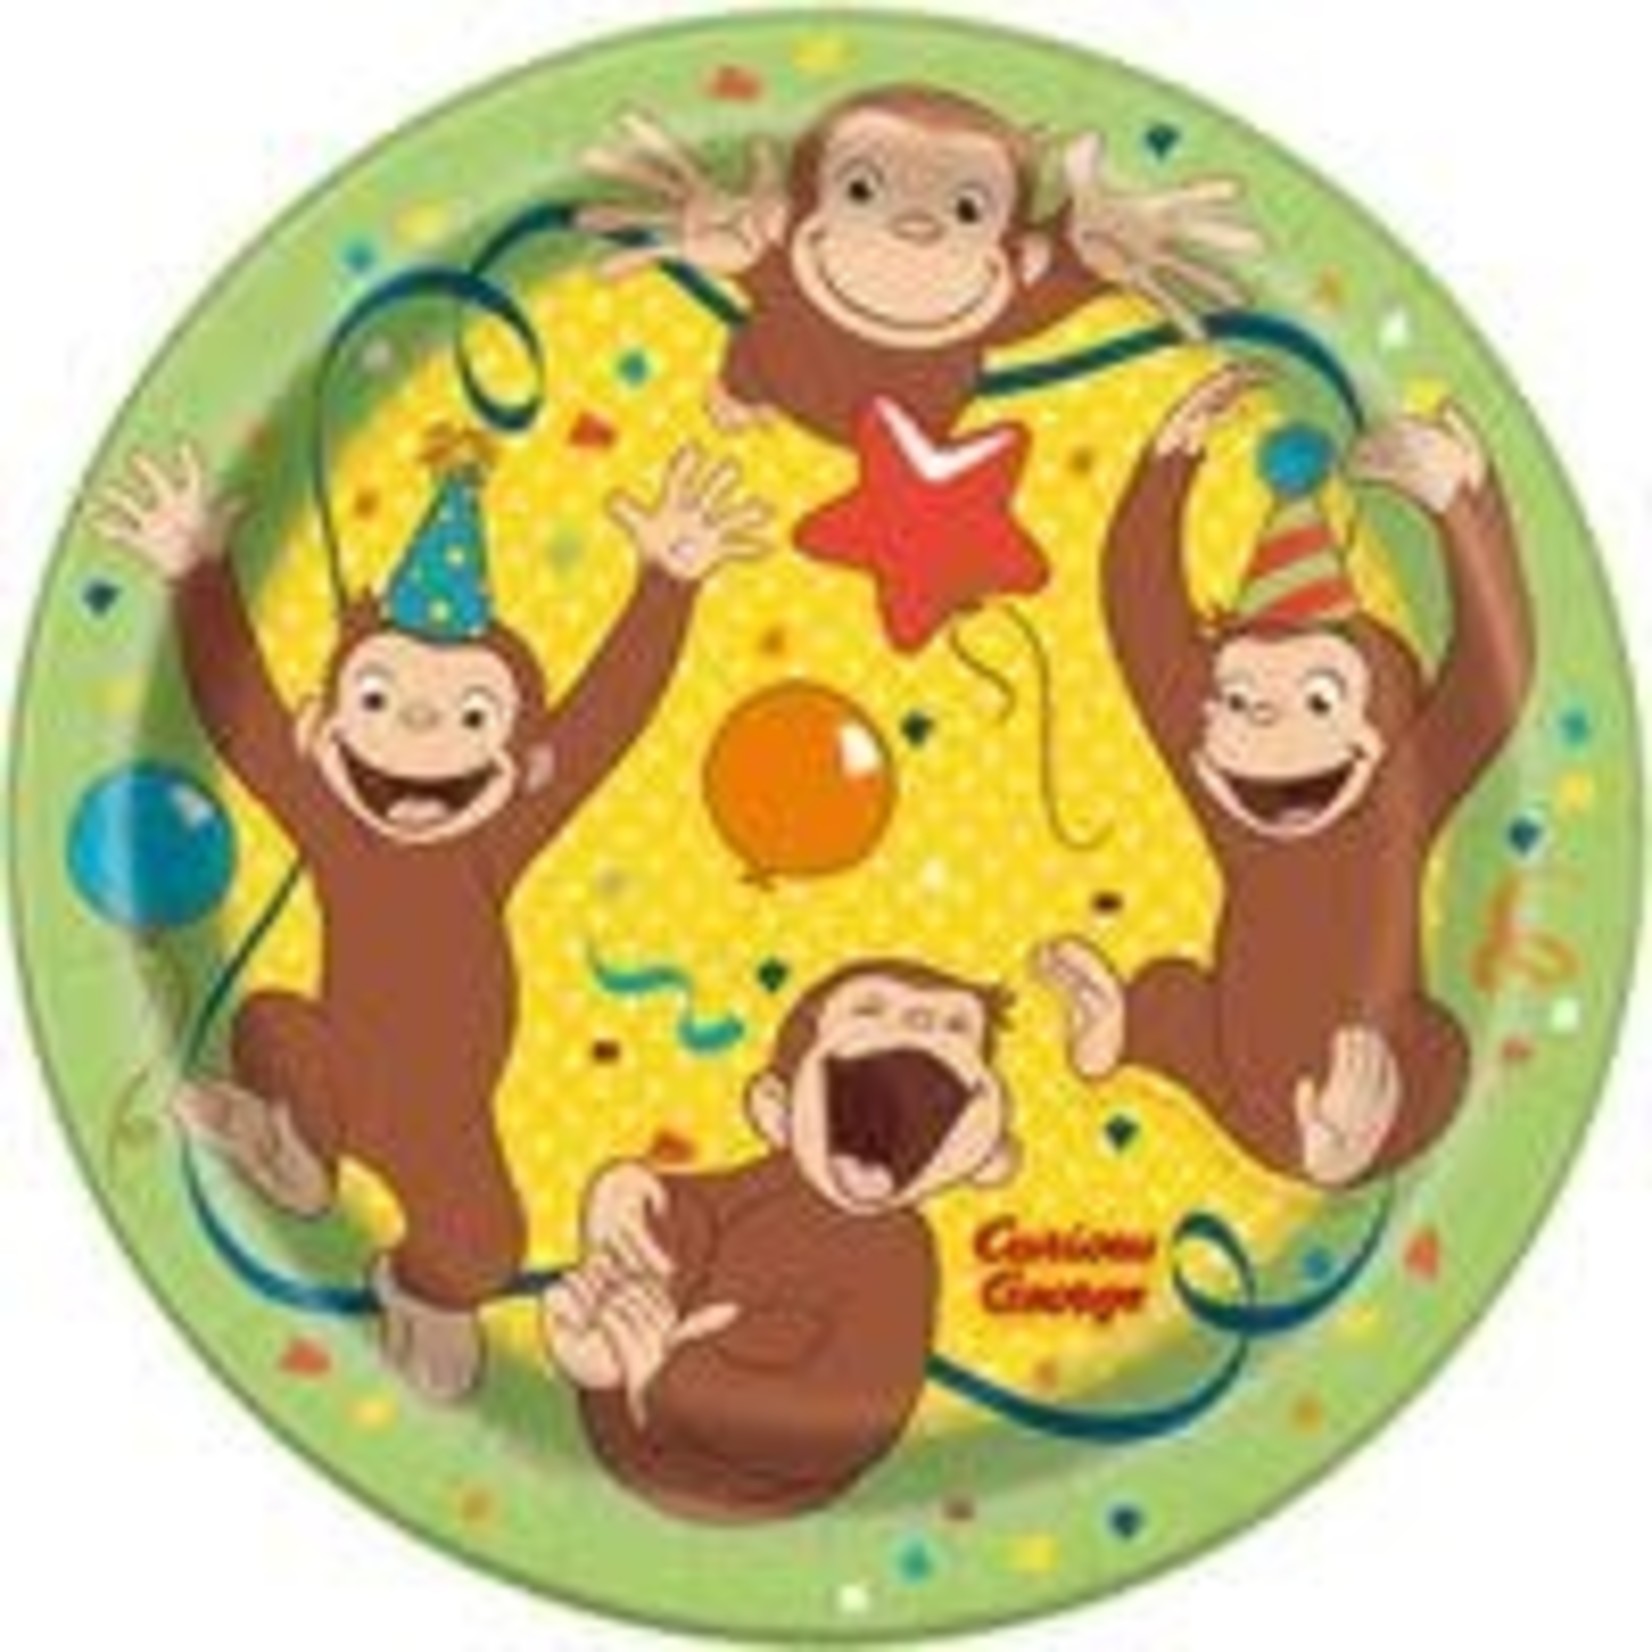 Curious George Plate